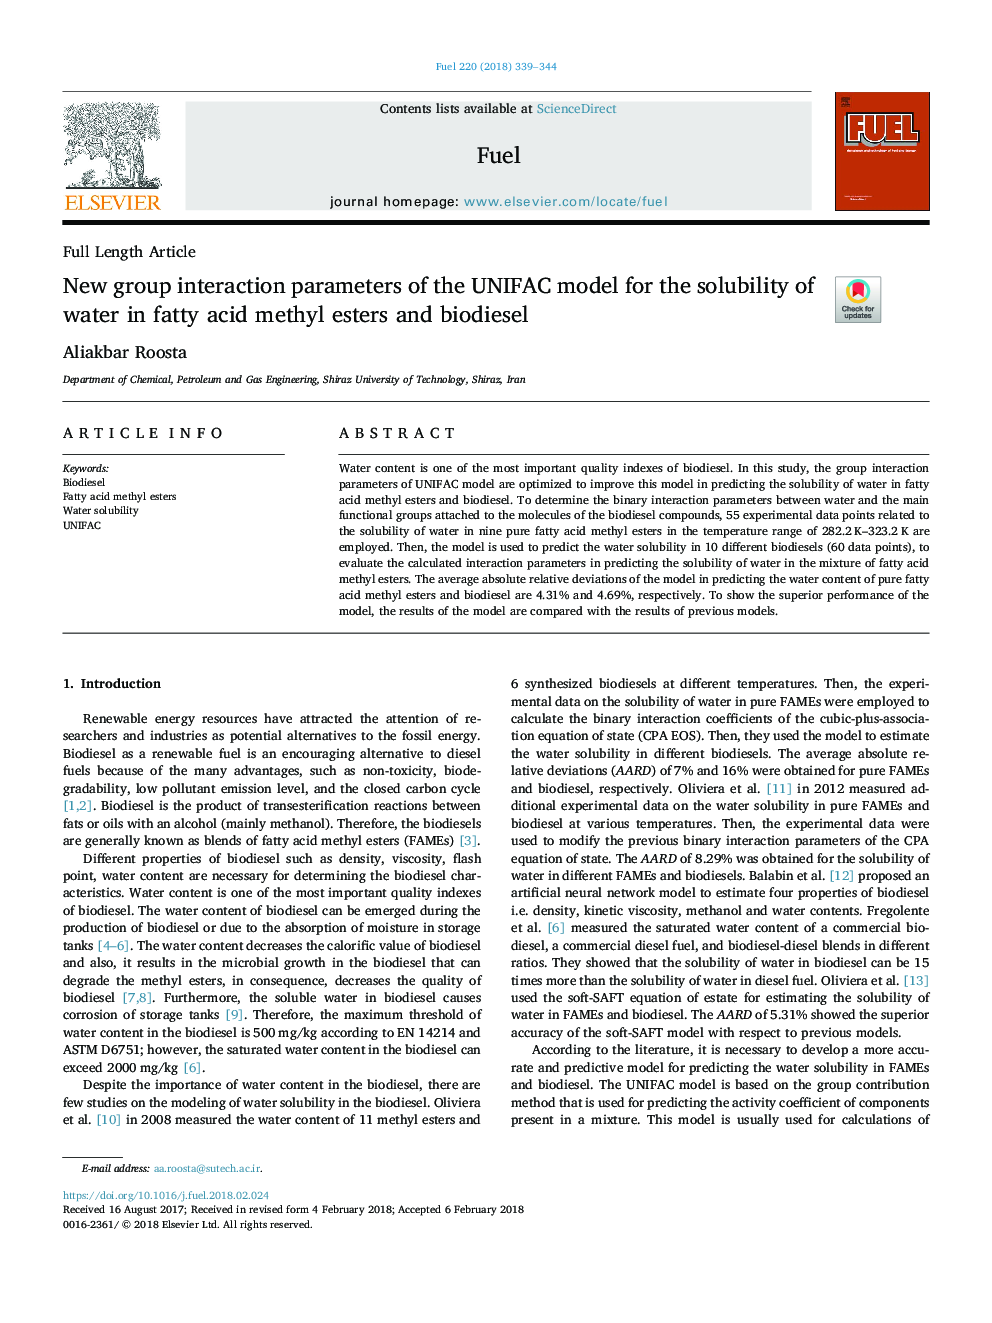 New group interaction parameters of the UNIFAC model for the solubility of water in fatty acid methyl esters and biodiesel